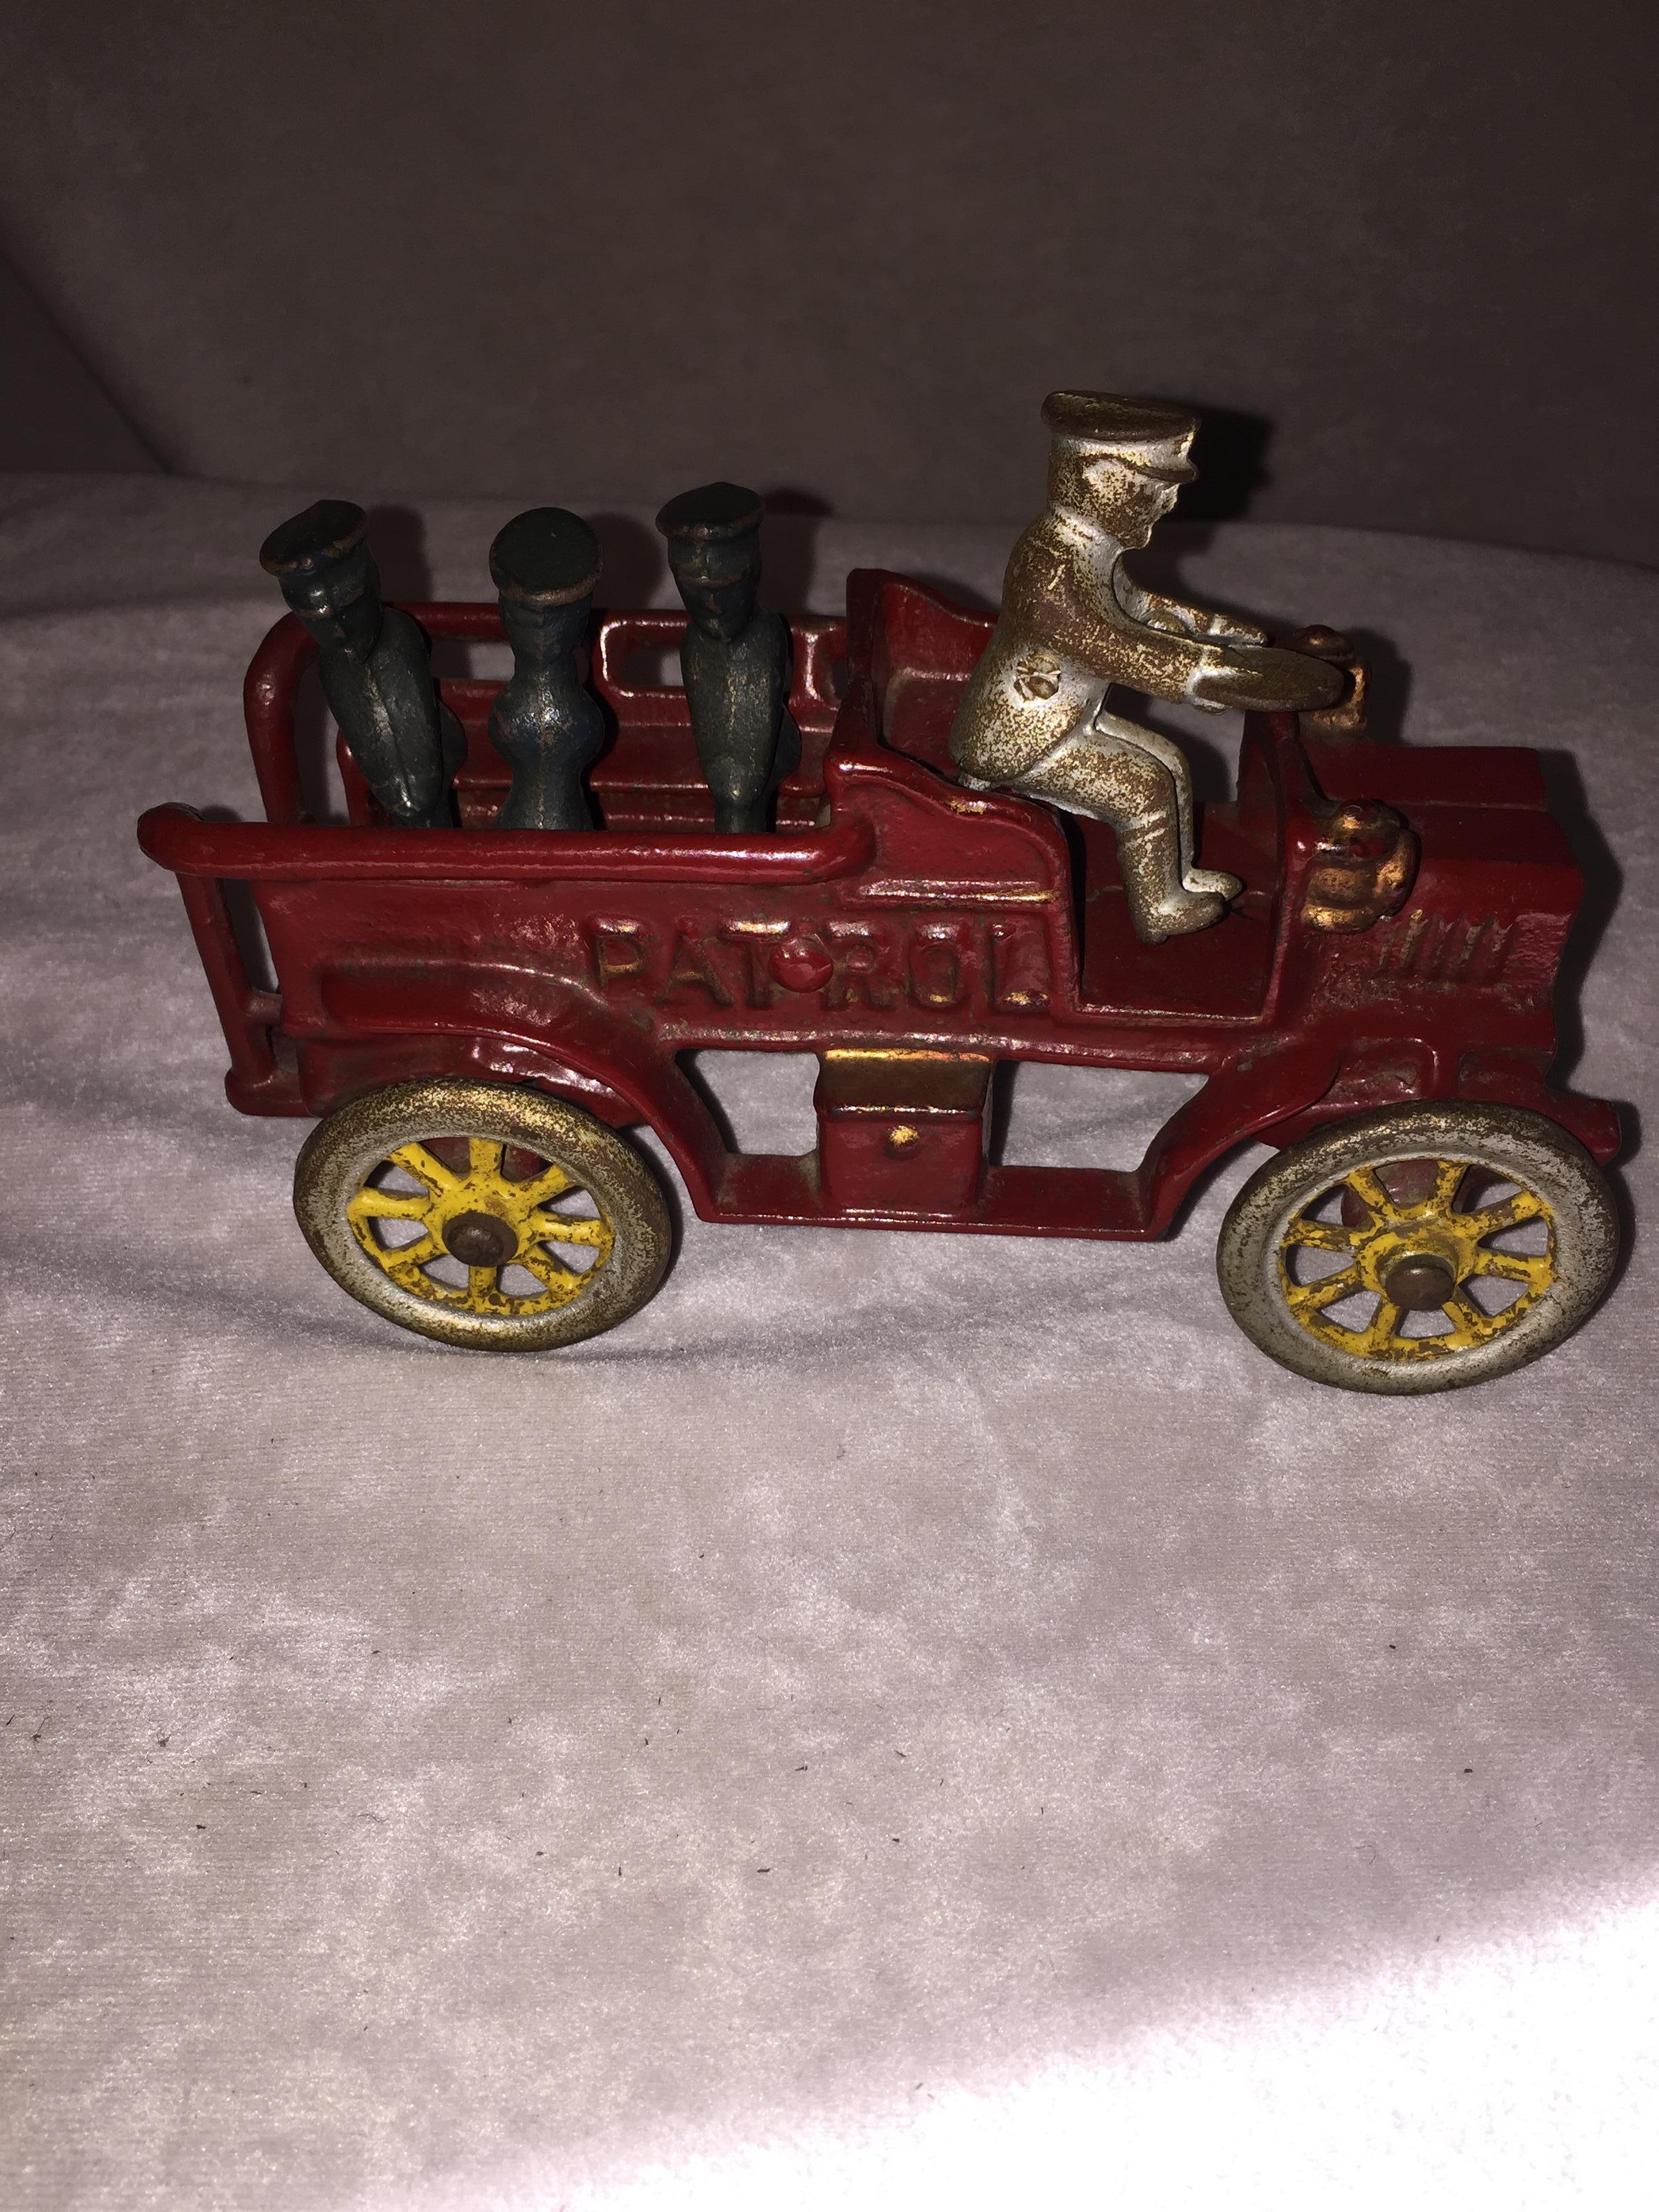 Cast iron toys are one of the great American traditions. We specialized in them here in the U.S.A. This is just a fine example of those toys. Key to purchasing old cast iron boil down to 3 questions. Are they antique ?, what is the condition of the